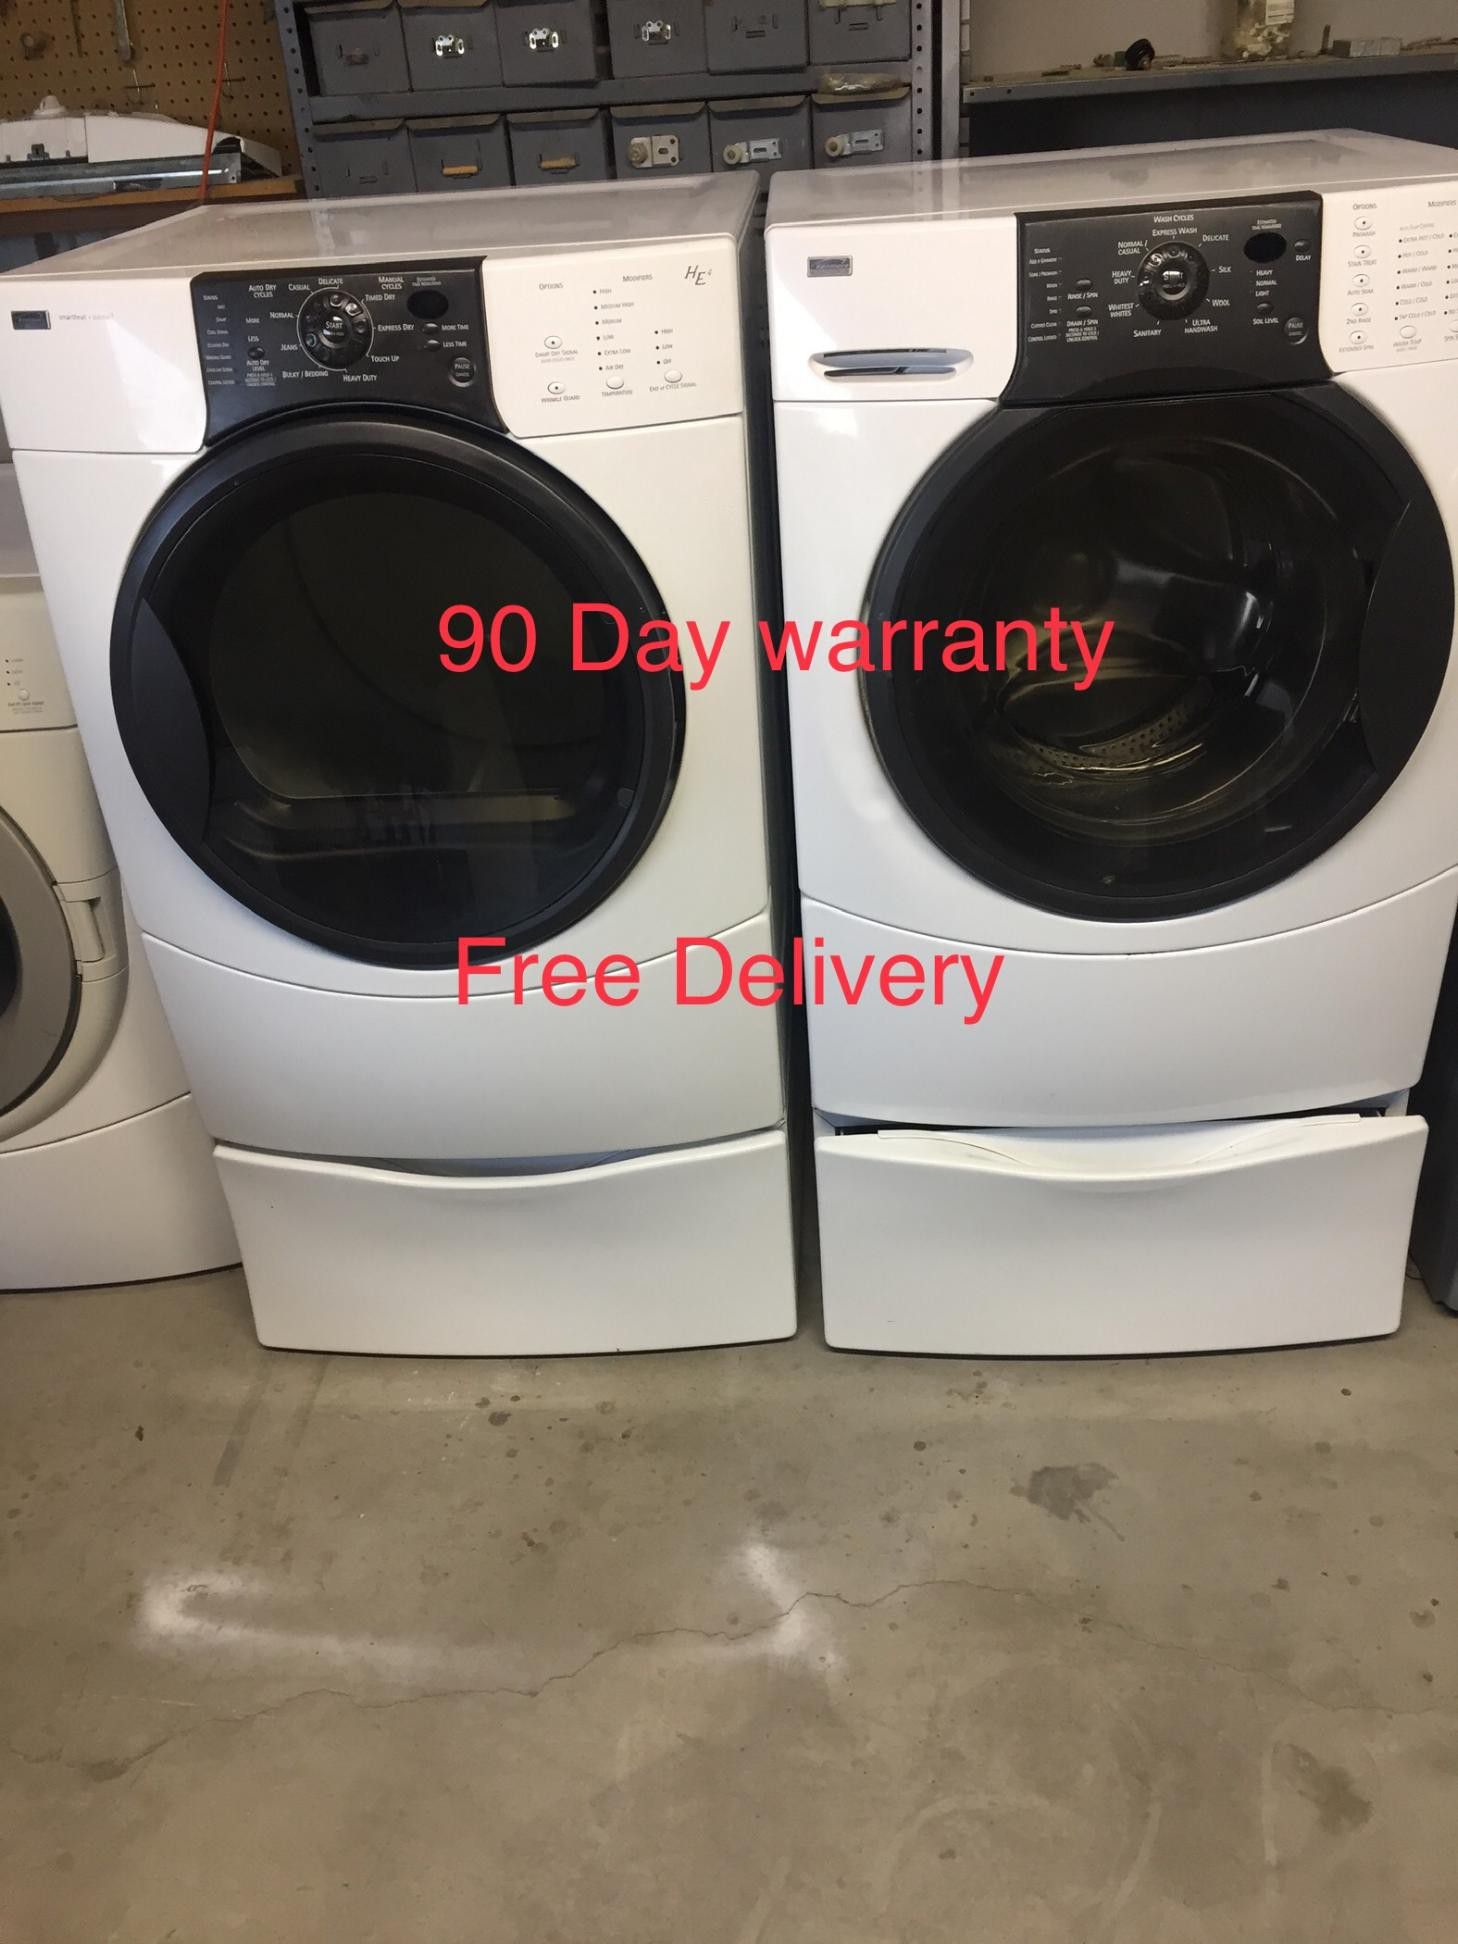 450 comes with 90 day warranty